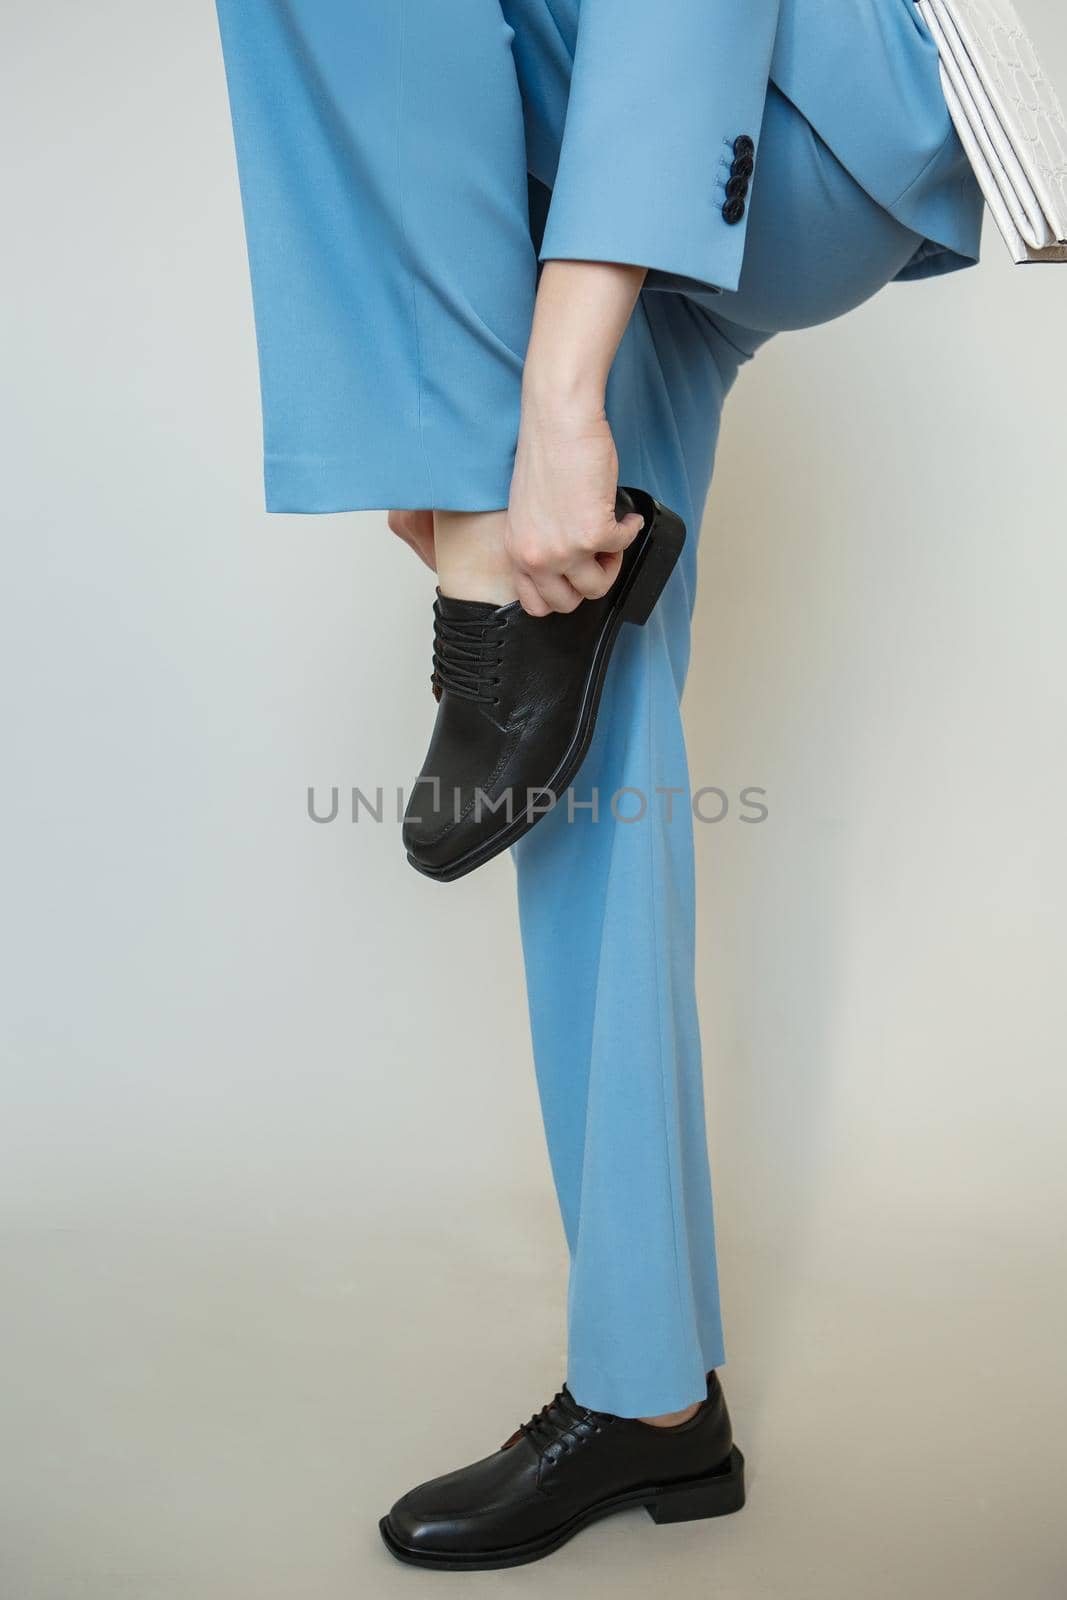 The model is a girl in a blue business suit. Shooting fashionable clothes for the store.